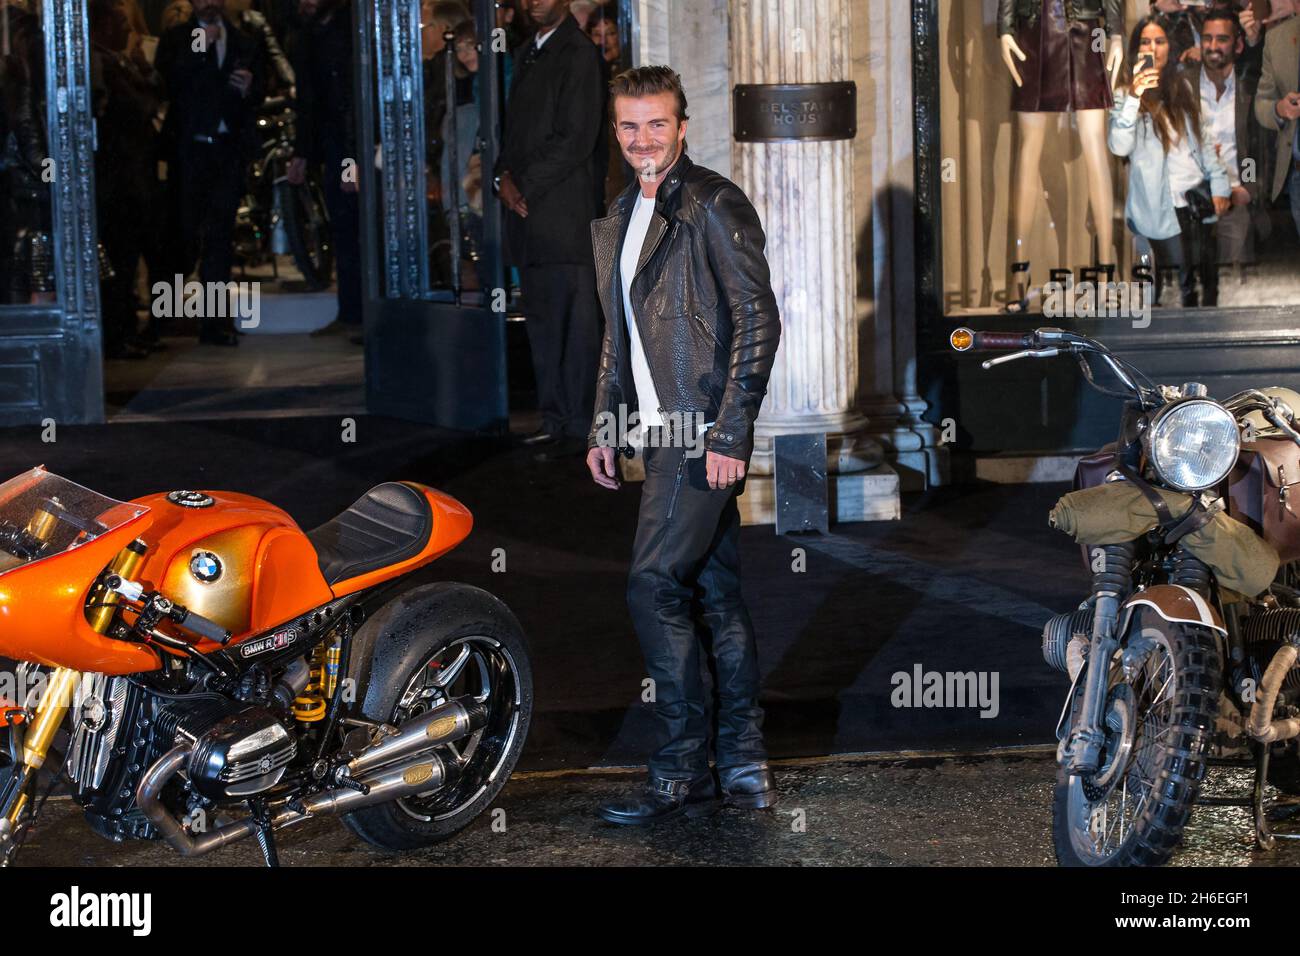 Belstaff Beckham High Resolution Stock Photography and Images - Alamy